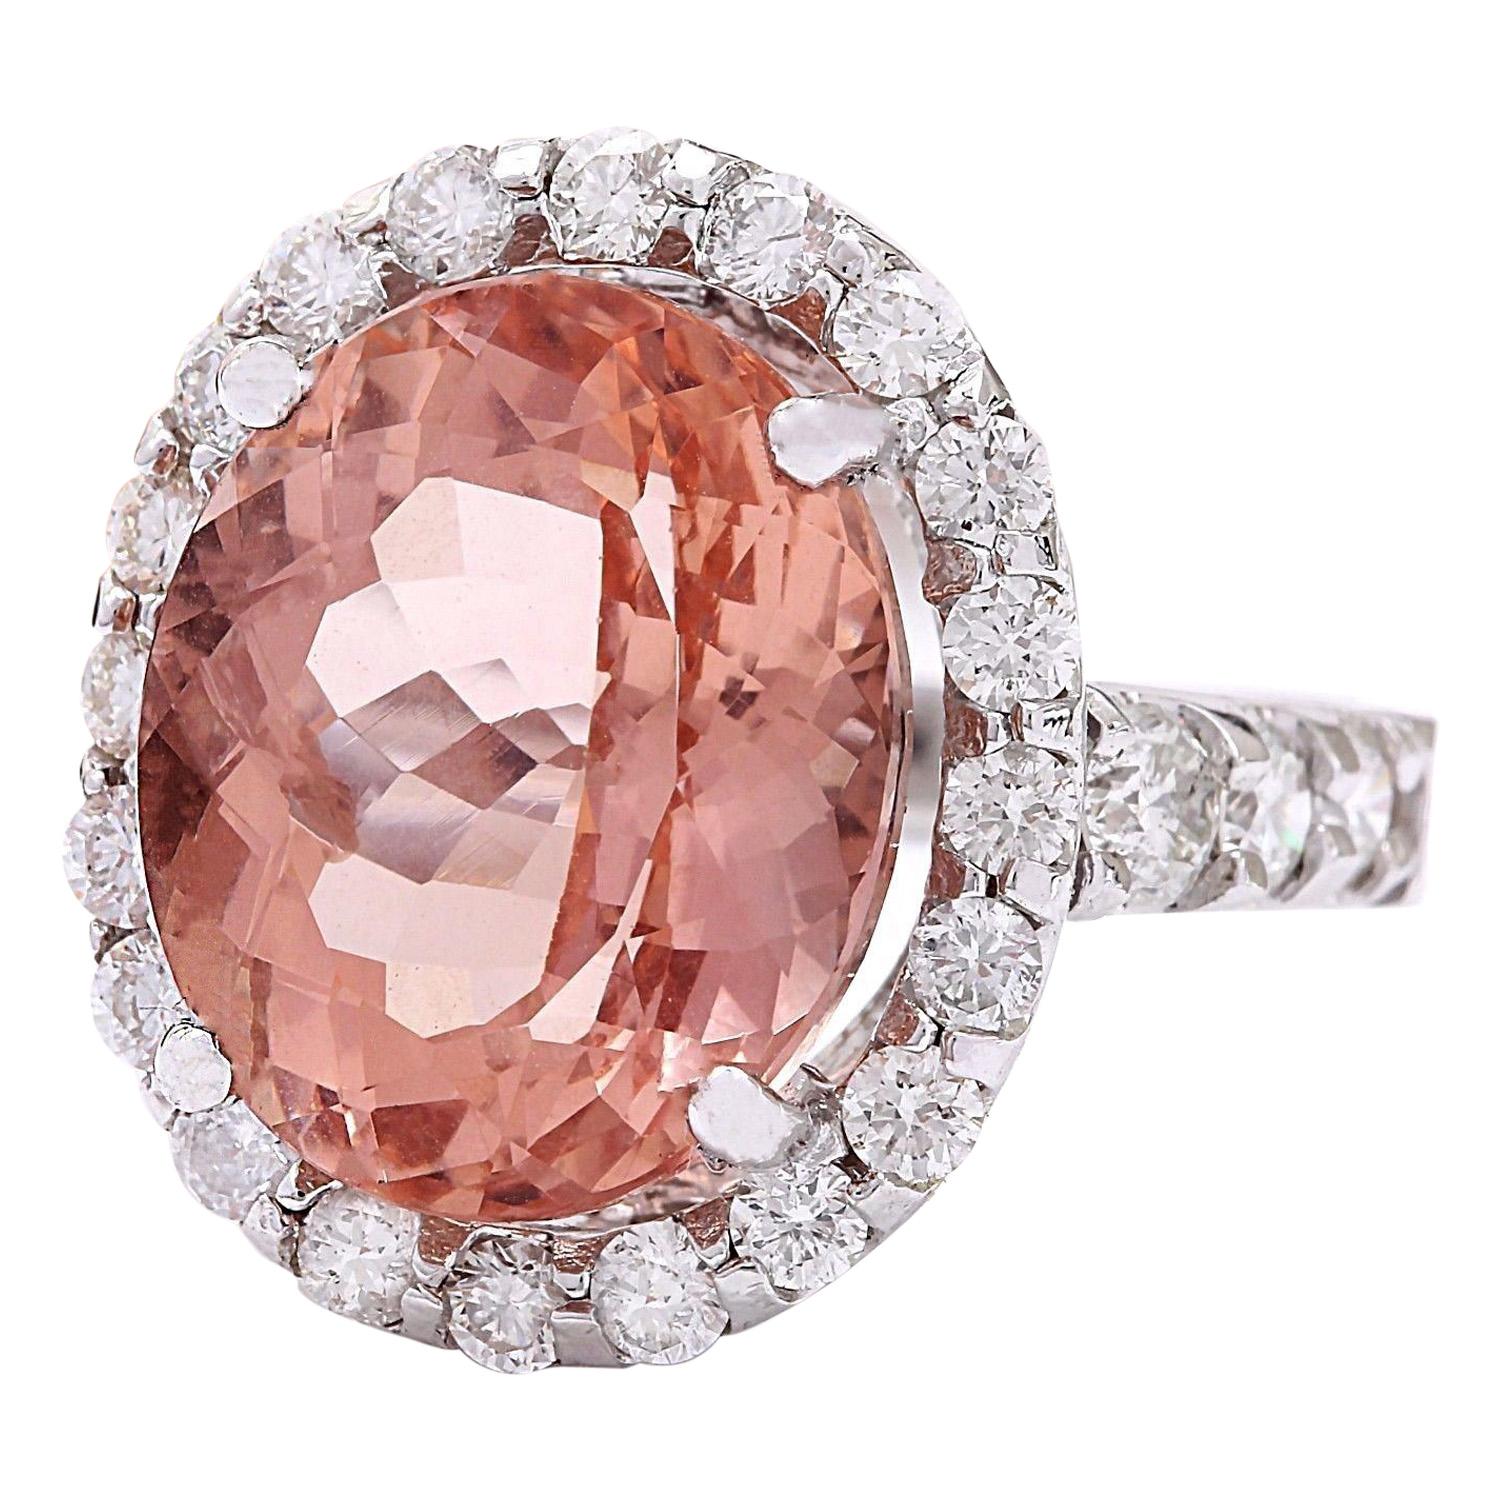 13.50 Carat Natural Morganite 14K Solid White Gold Diamond Ring
 Item Type: Ring
 Item Style: Cocktail
 Material: 14K White Gold
 Mainstone: Morganite
 Stone Color: Peach
 Stone Weight: 12.00 Carat
 Stone Shape: Oval
 Stone Quantity: 1
 Stone